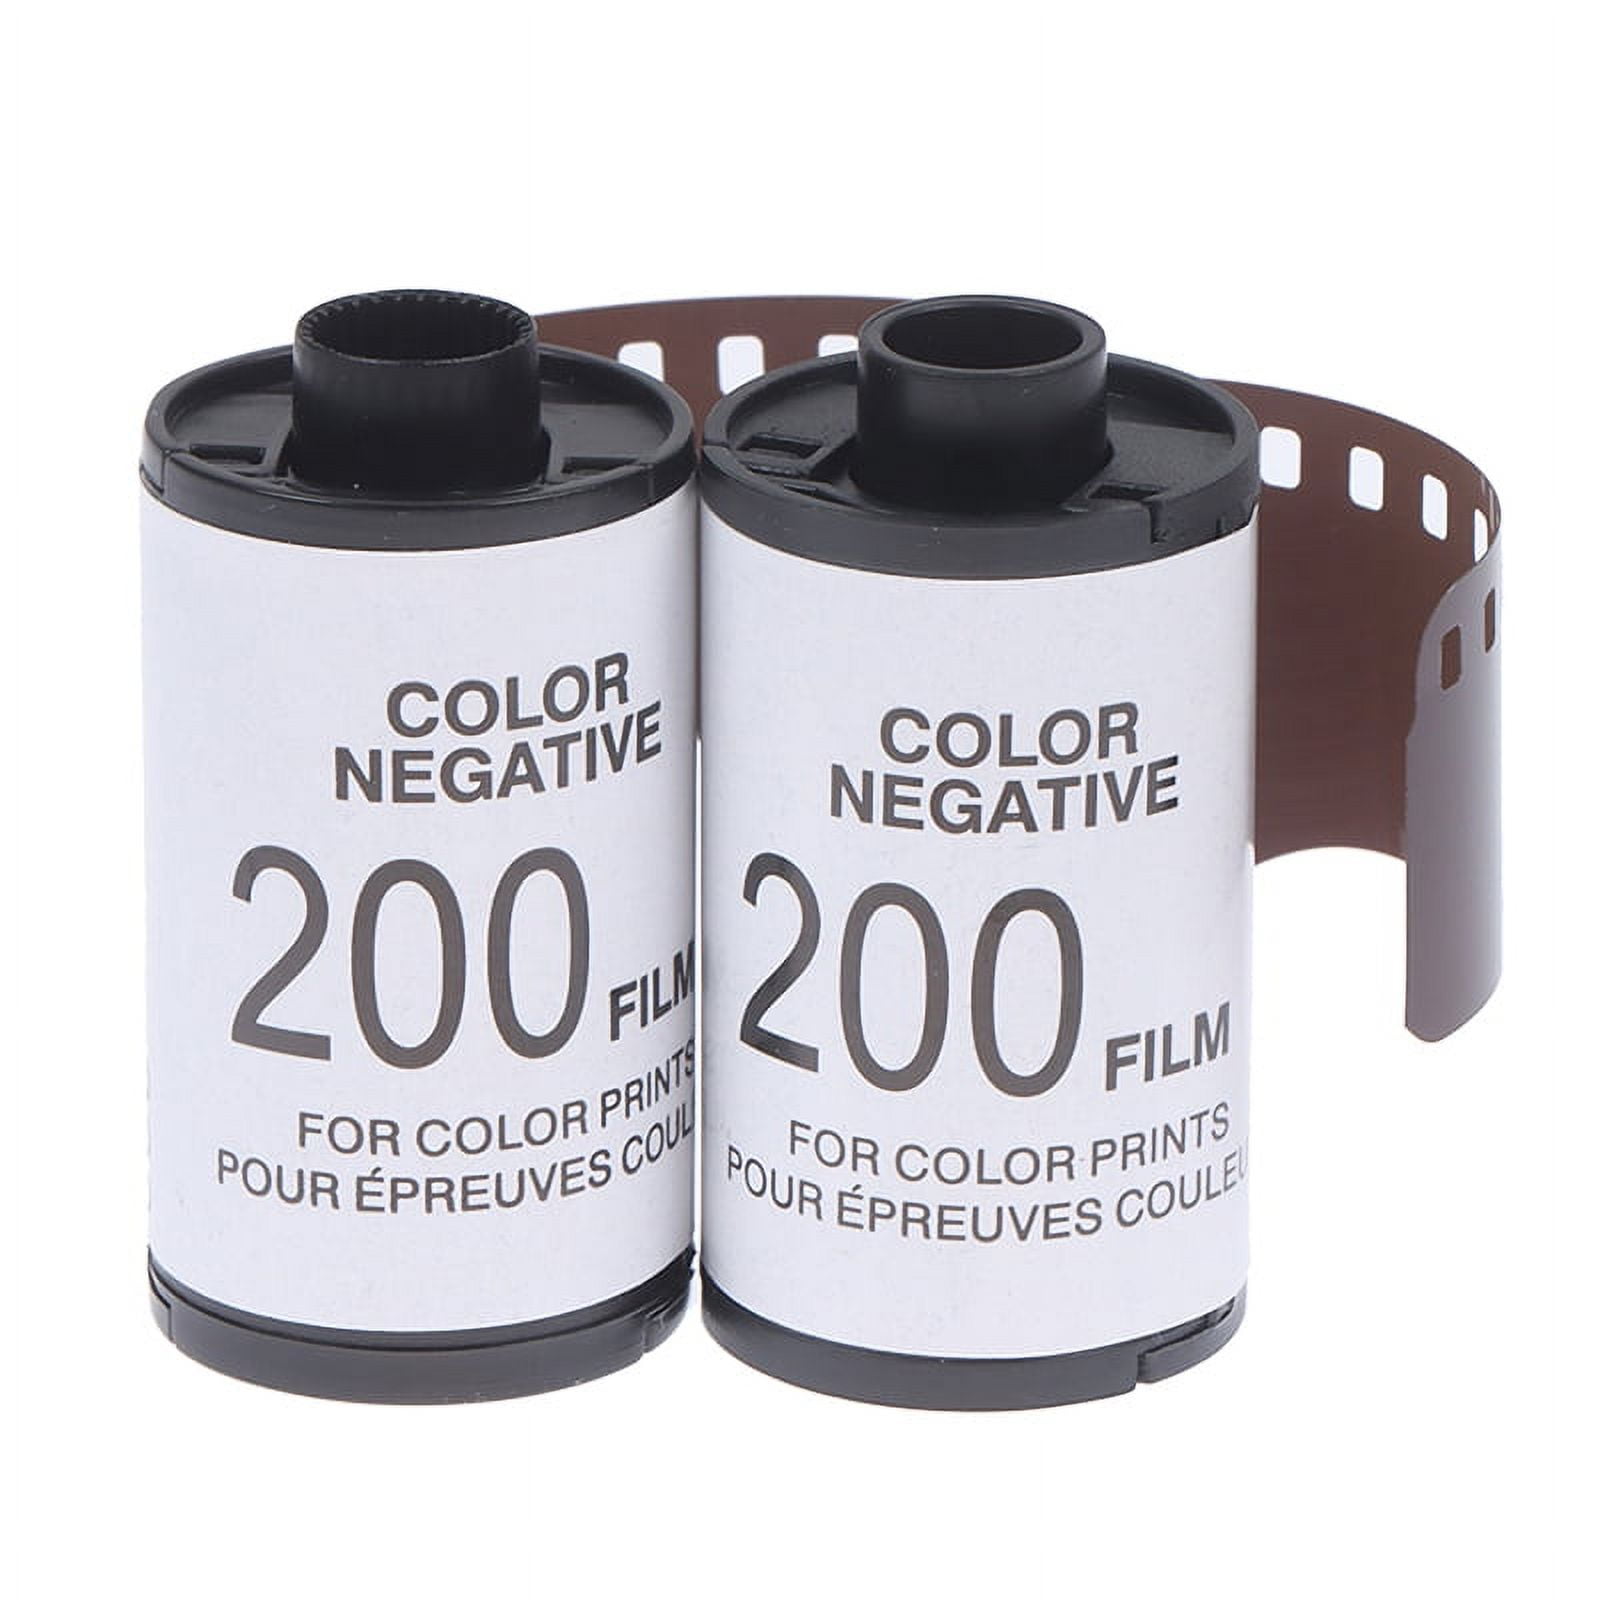 Generic 35MM Camera ISO SO200 Type135 Color Film for Beginners 3 Pack